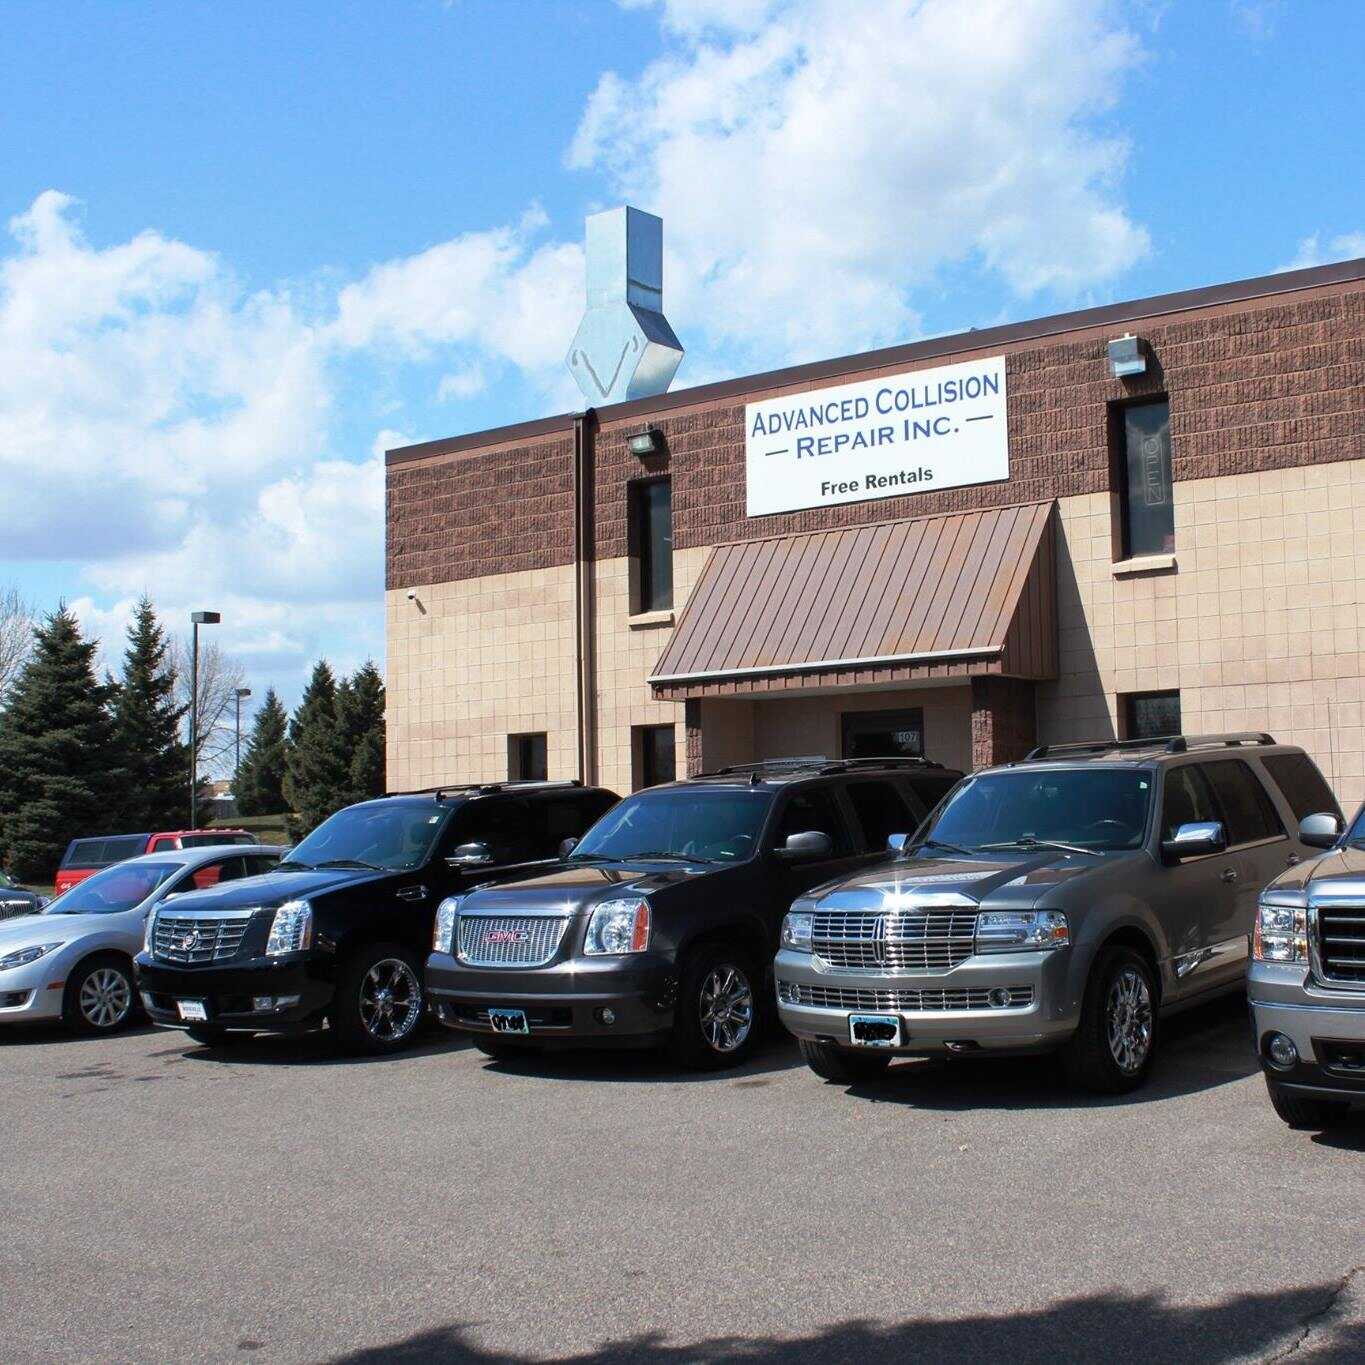 The exterior area of Advanced Collision Repairs located in Maple Grove, MN.